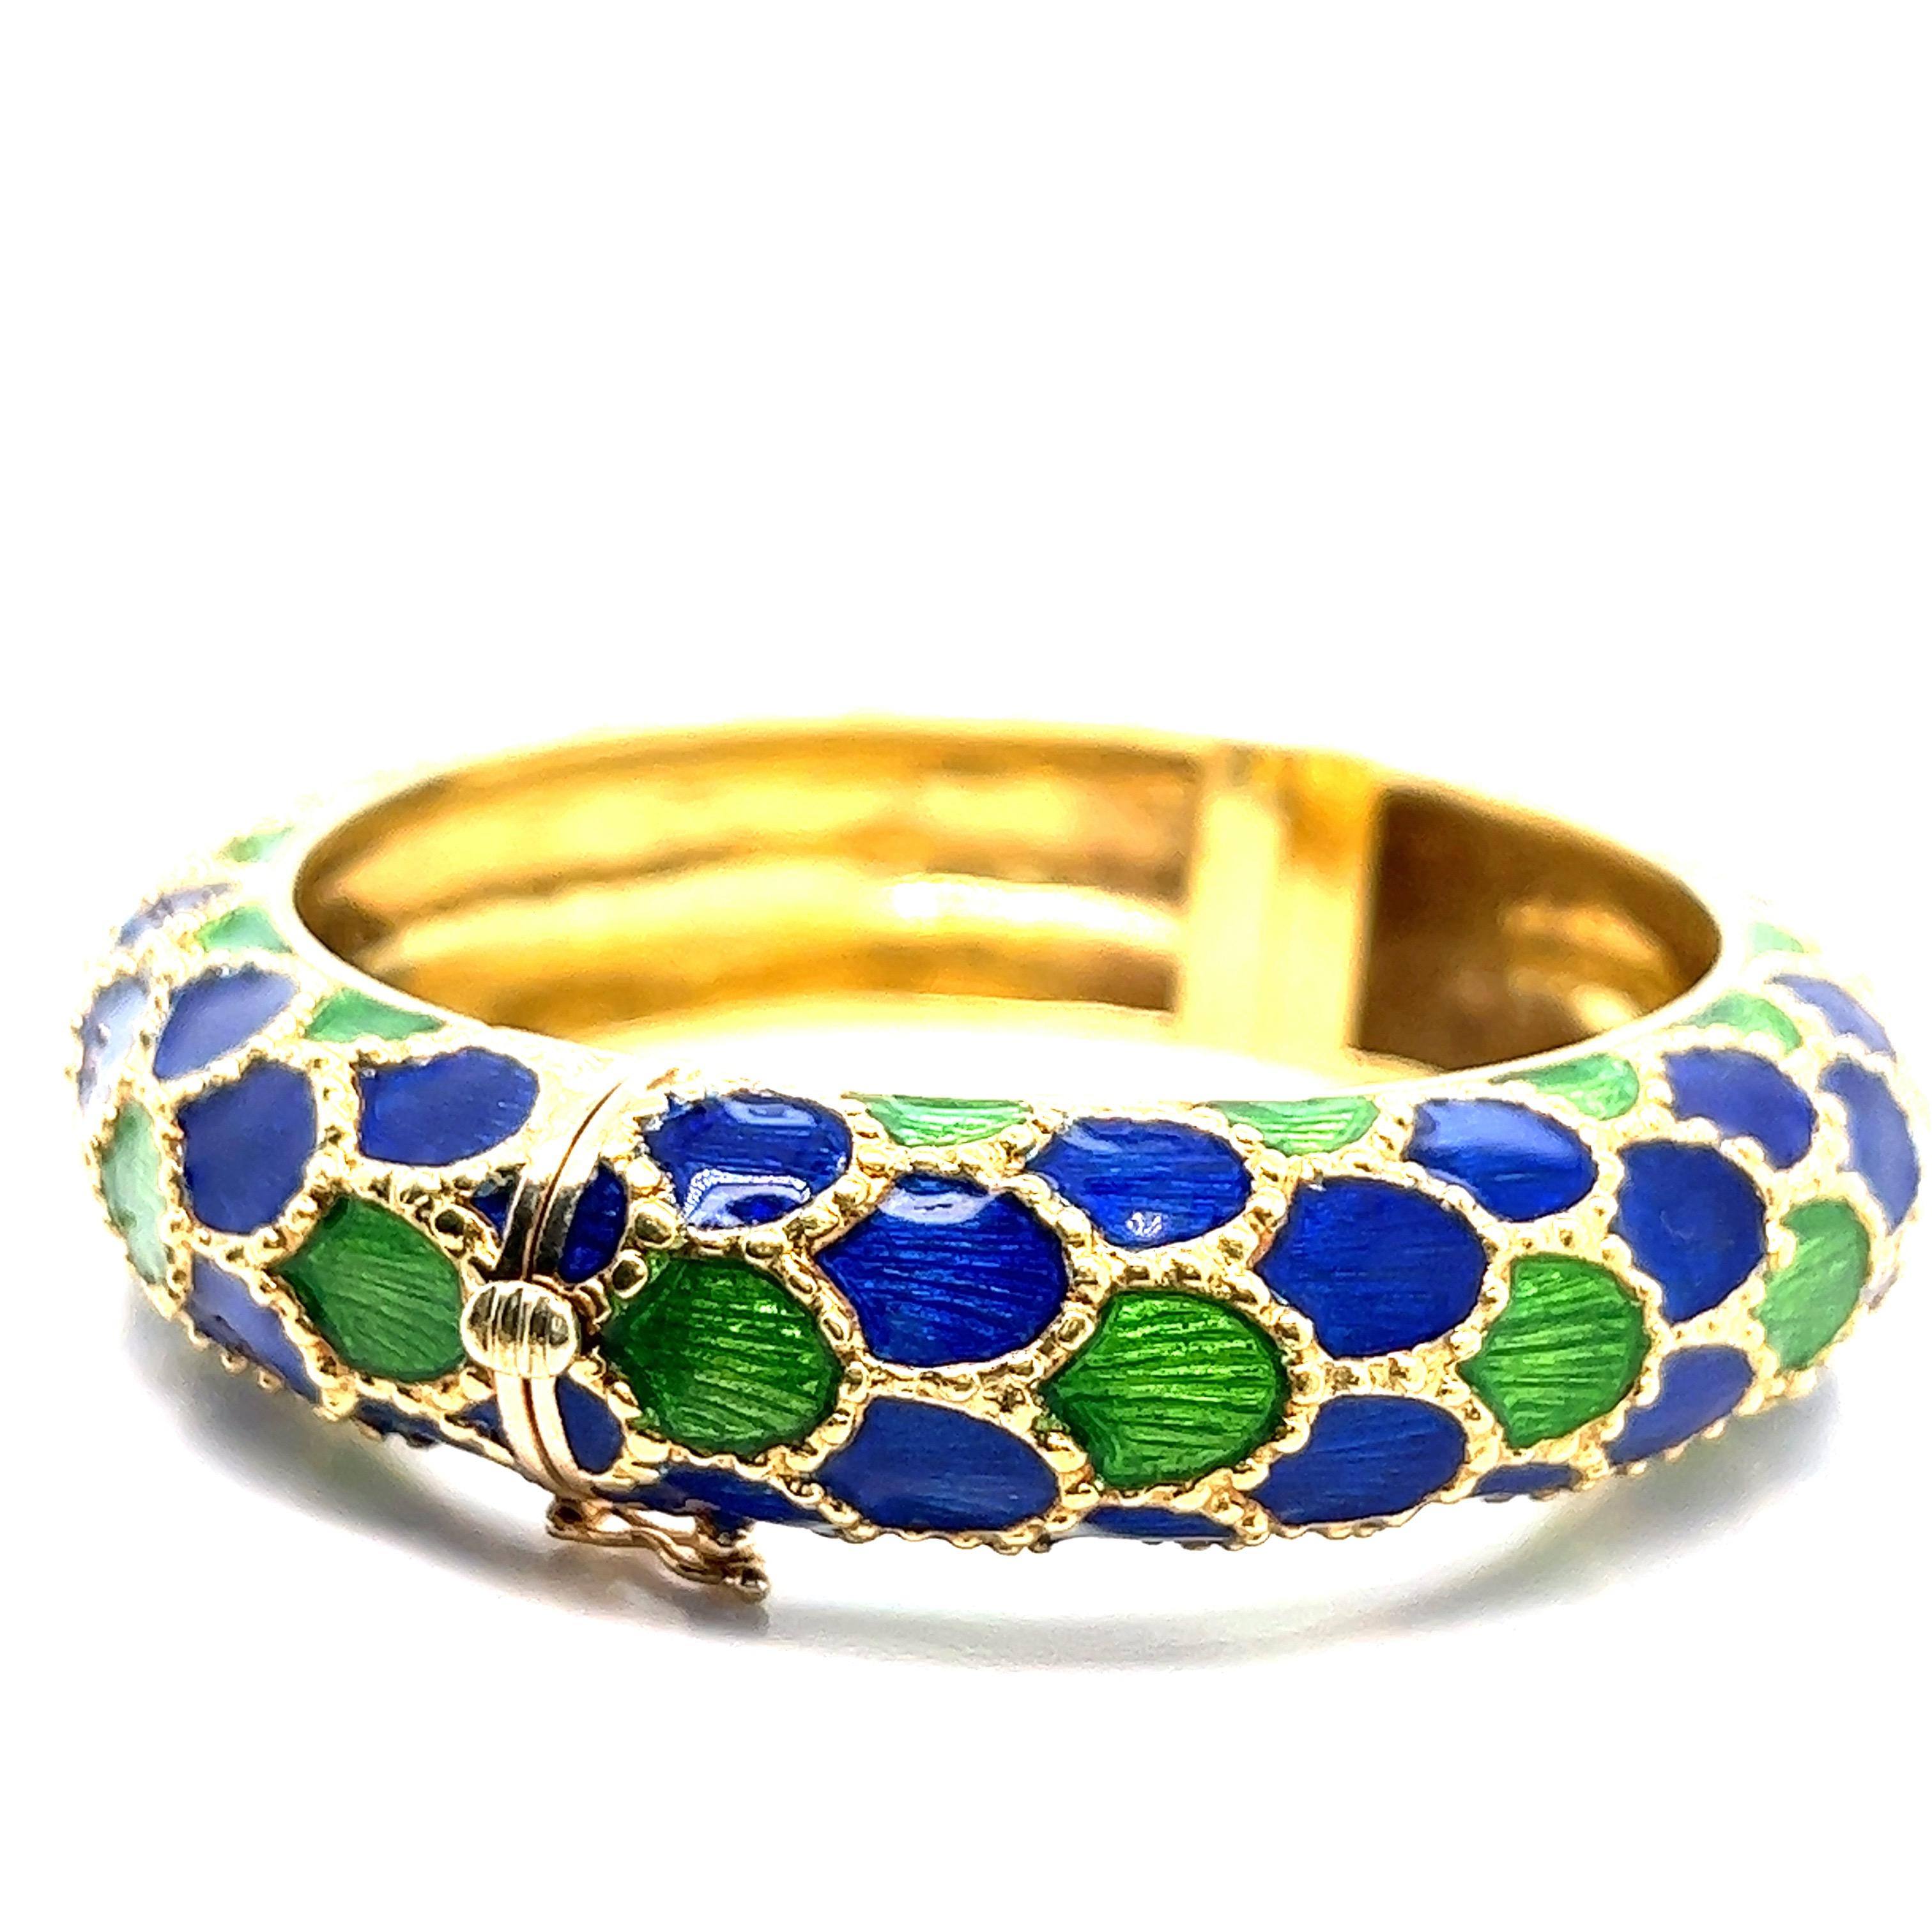 Tiffany & Co. 18 karat yellow gold bangle bracelet with royal blue and green enamel. It features a fish scale design throughout. Marked: Tiffany / 18k. Total weight: 82.9 grams. Width: 3 inches. Length: 2.75 inches. Inner circumference: 7 inches.  